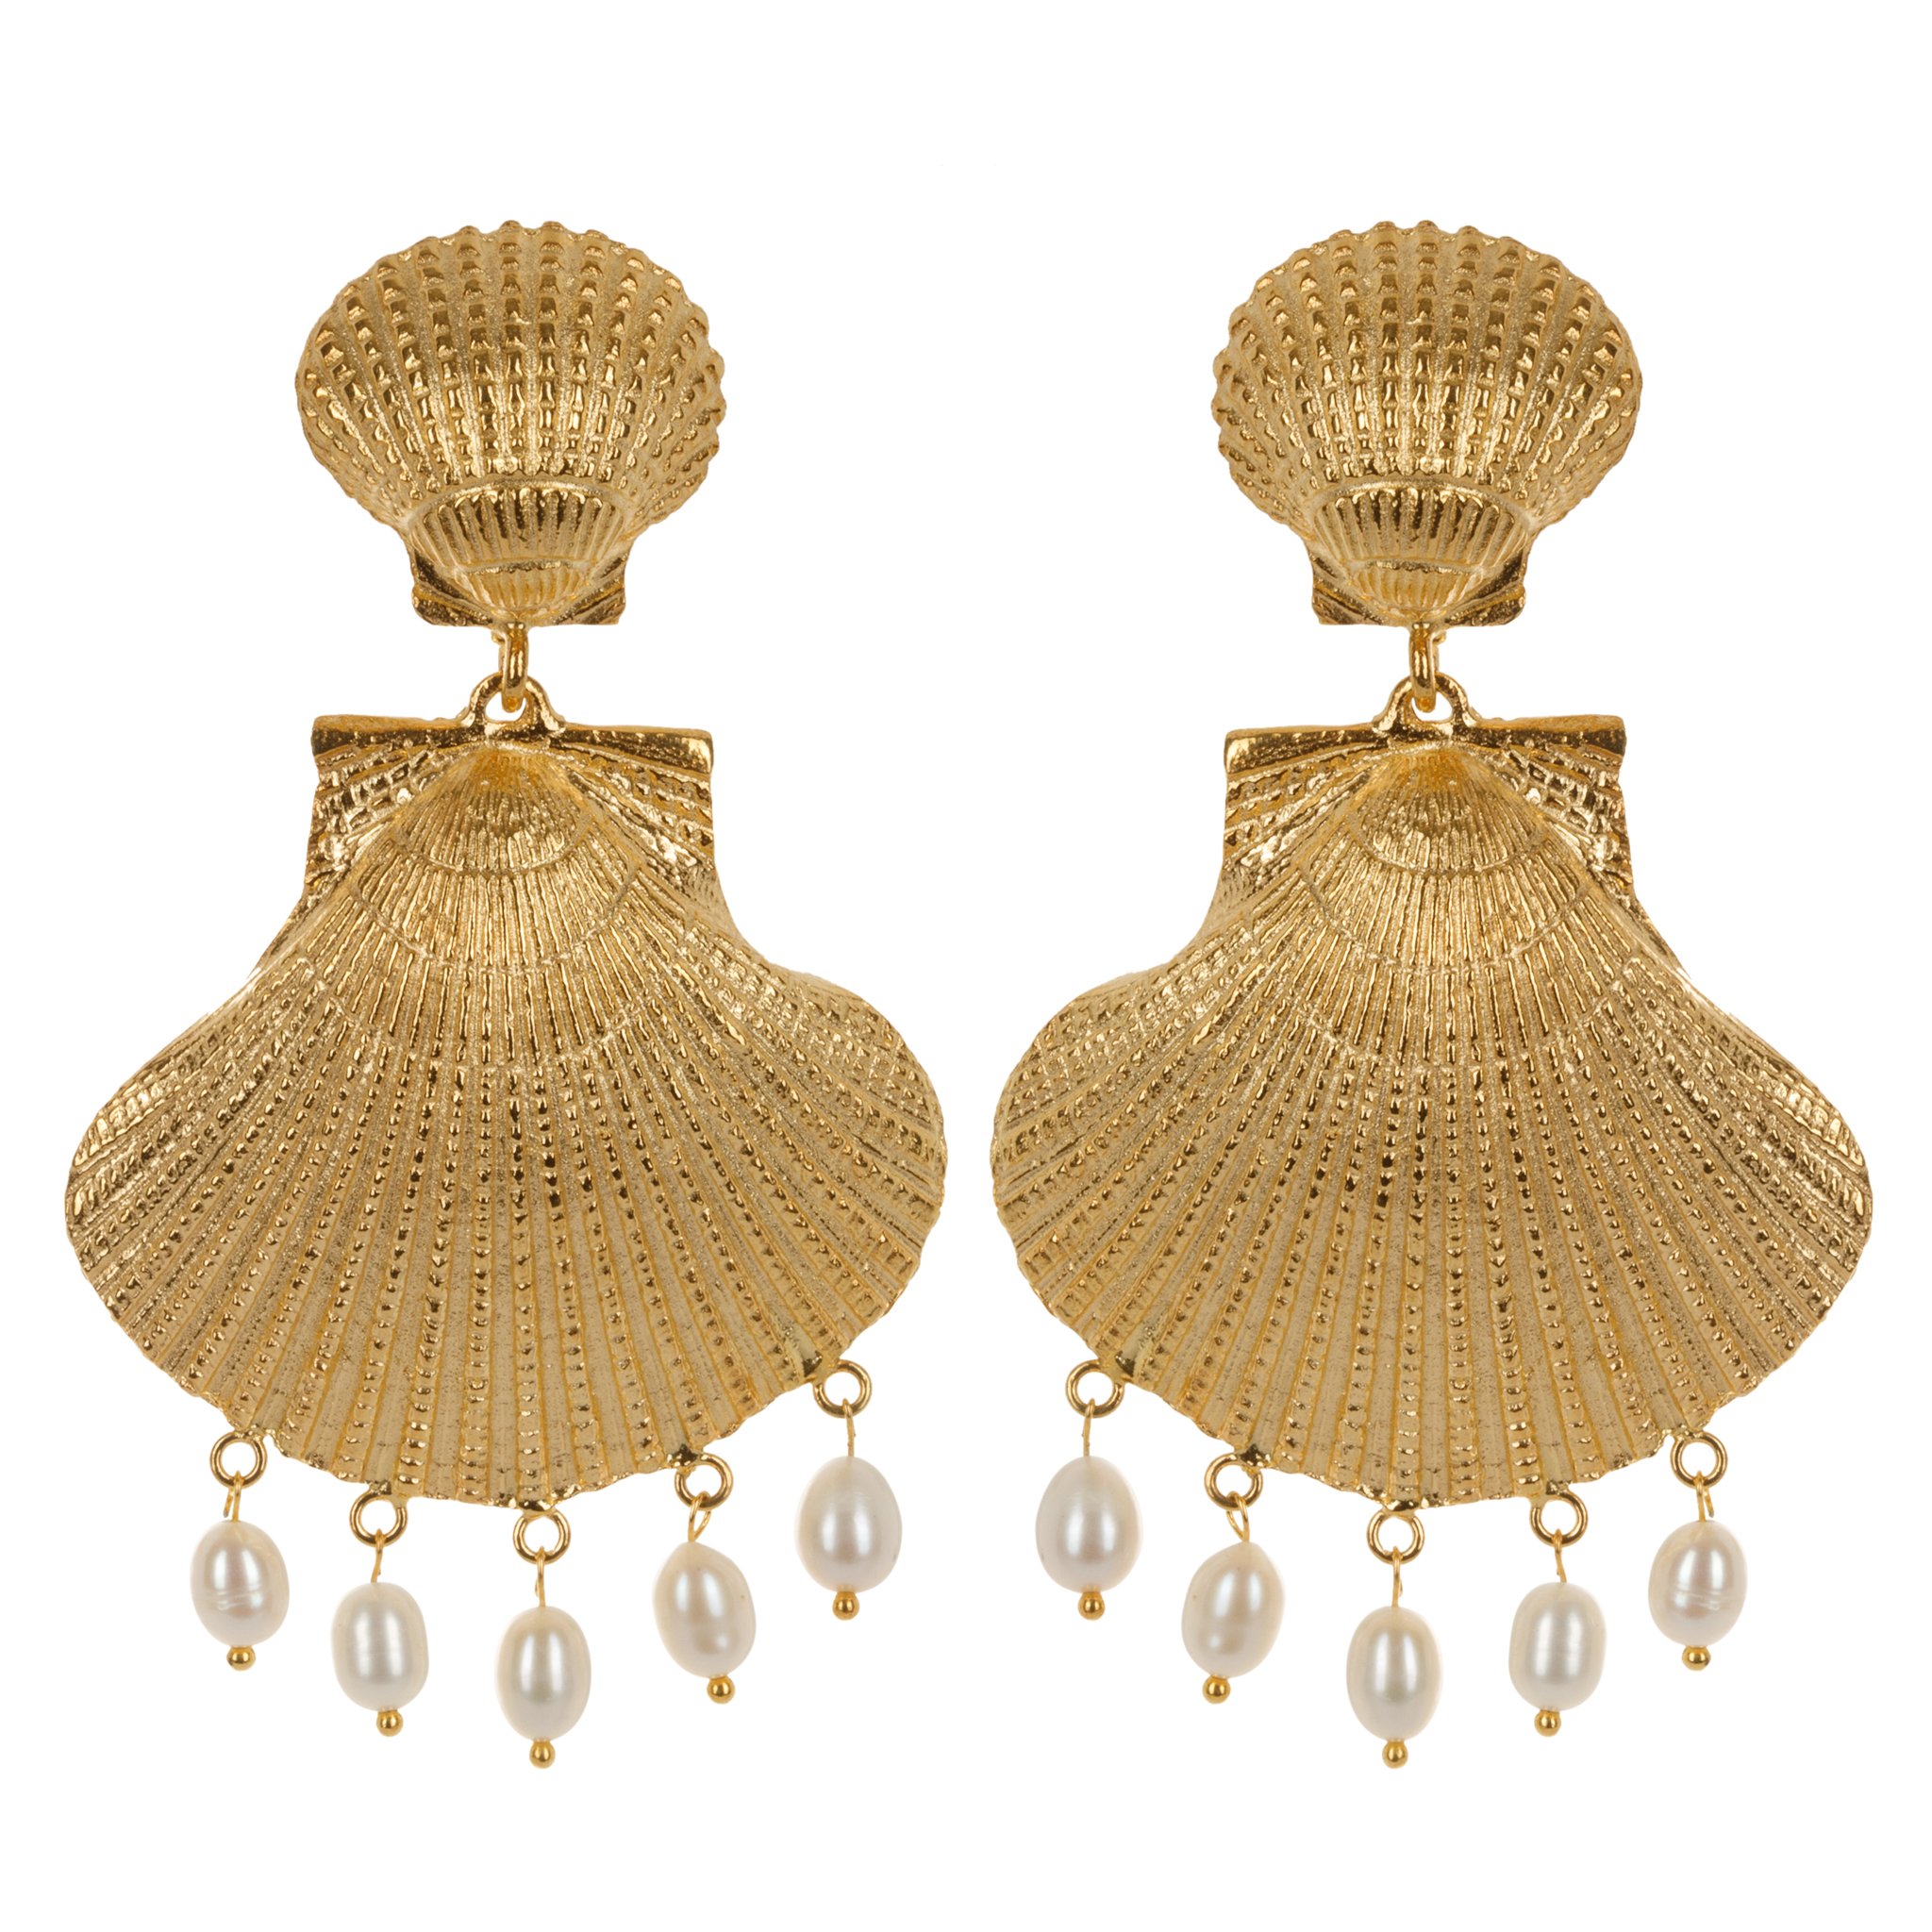 Christie Nicolaides earrings, $289